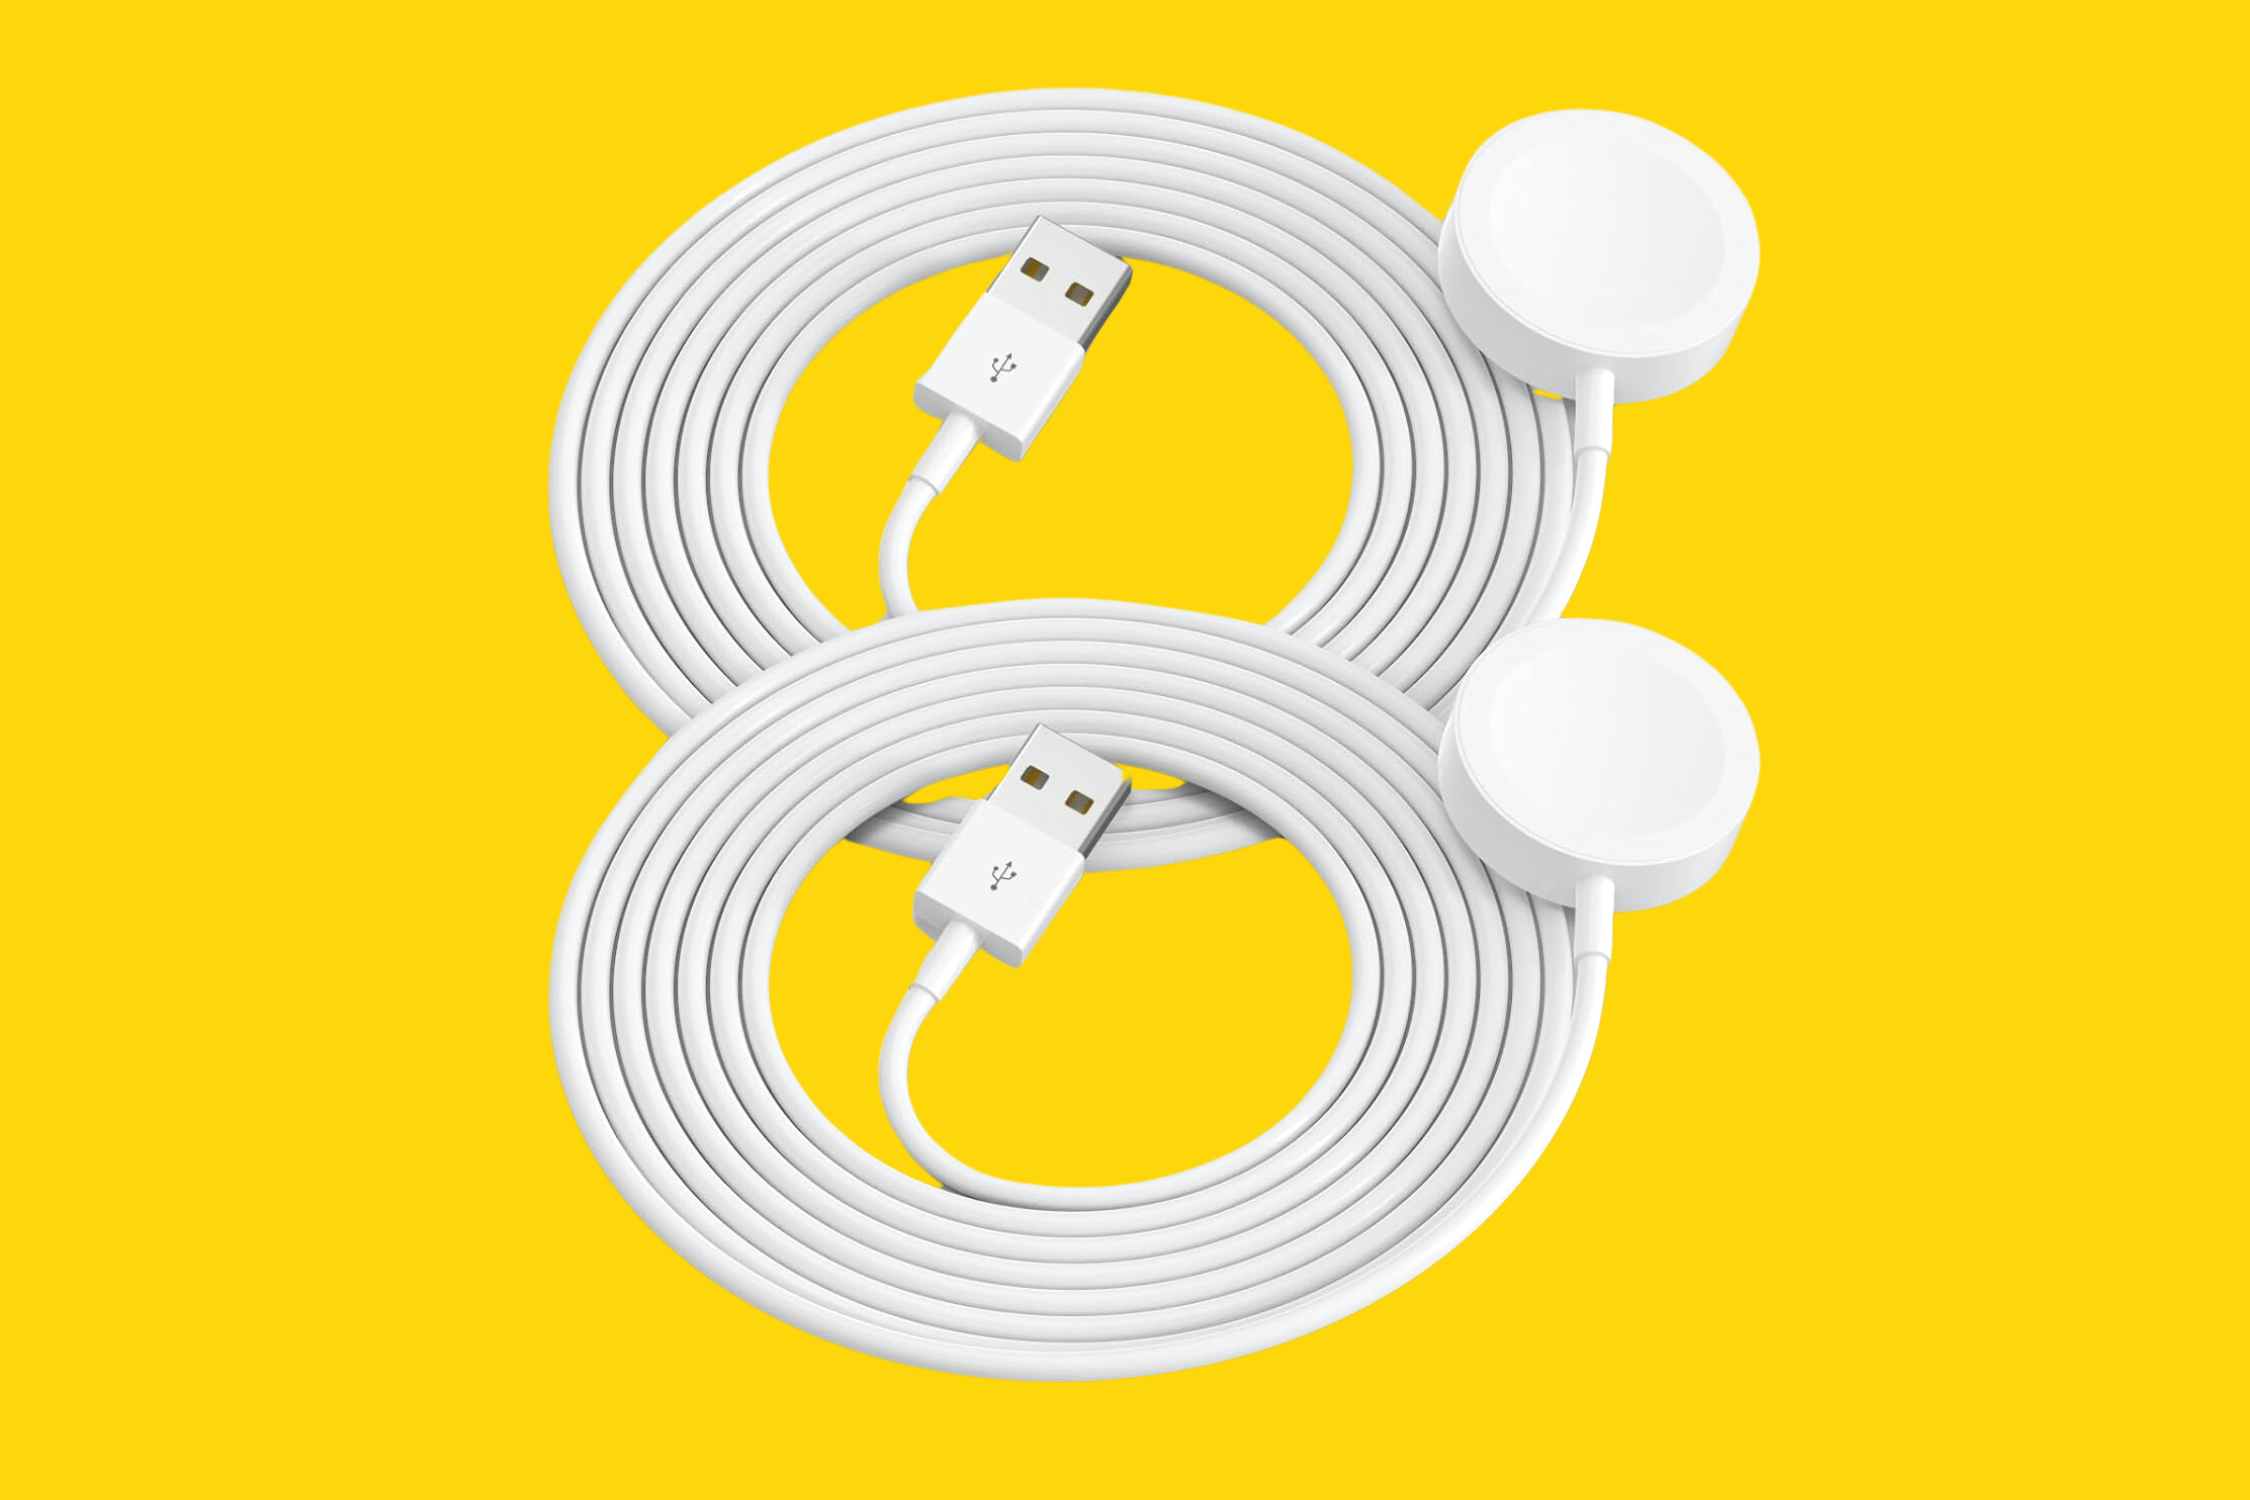 Apple Watch Chargers 2-Pack, Only $4.94 on Amazon (Reg. $13)